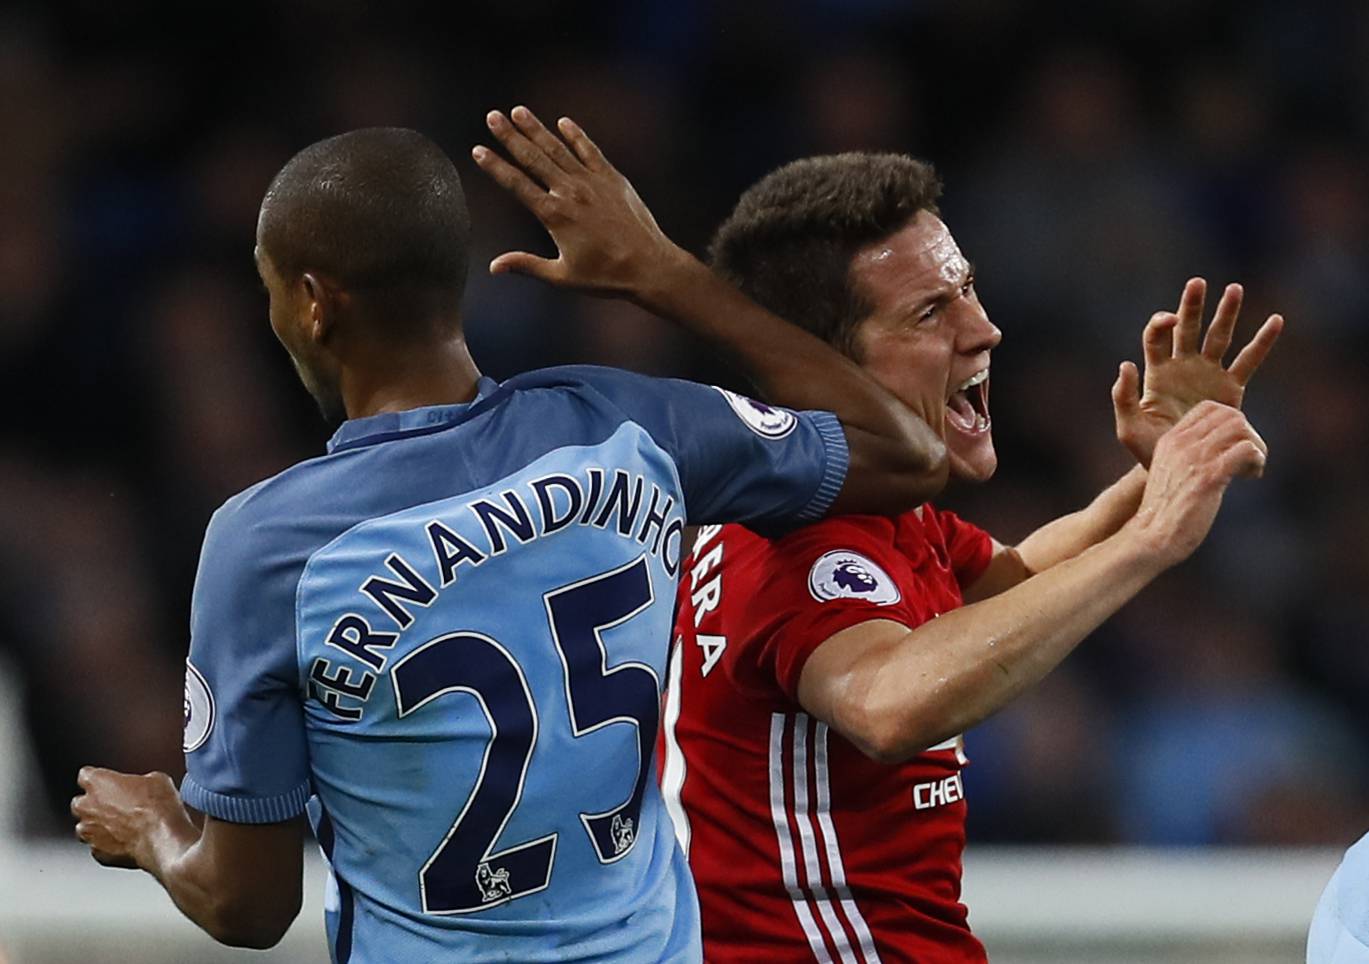 Manchester City's Fernandinho clashes with Manchester United's Ander Herrera